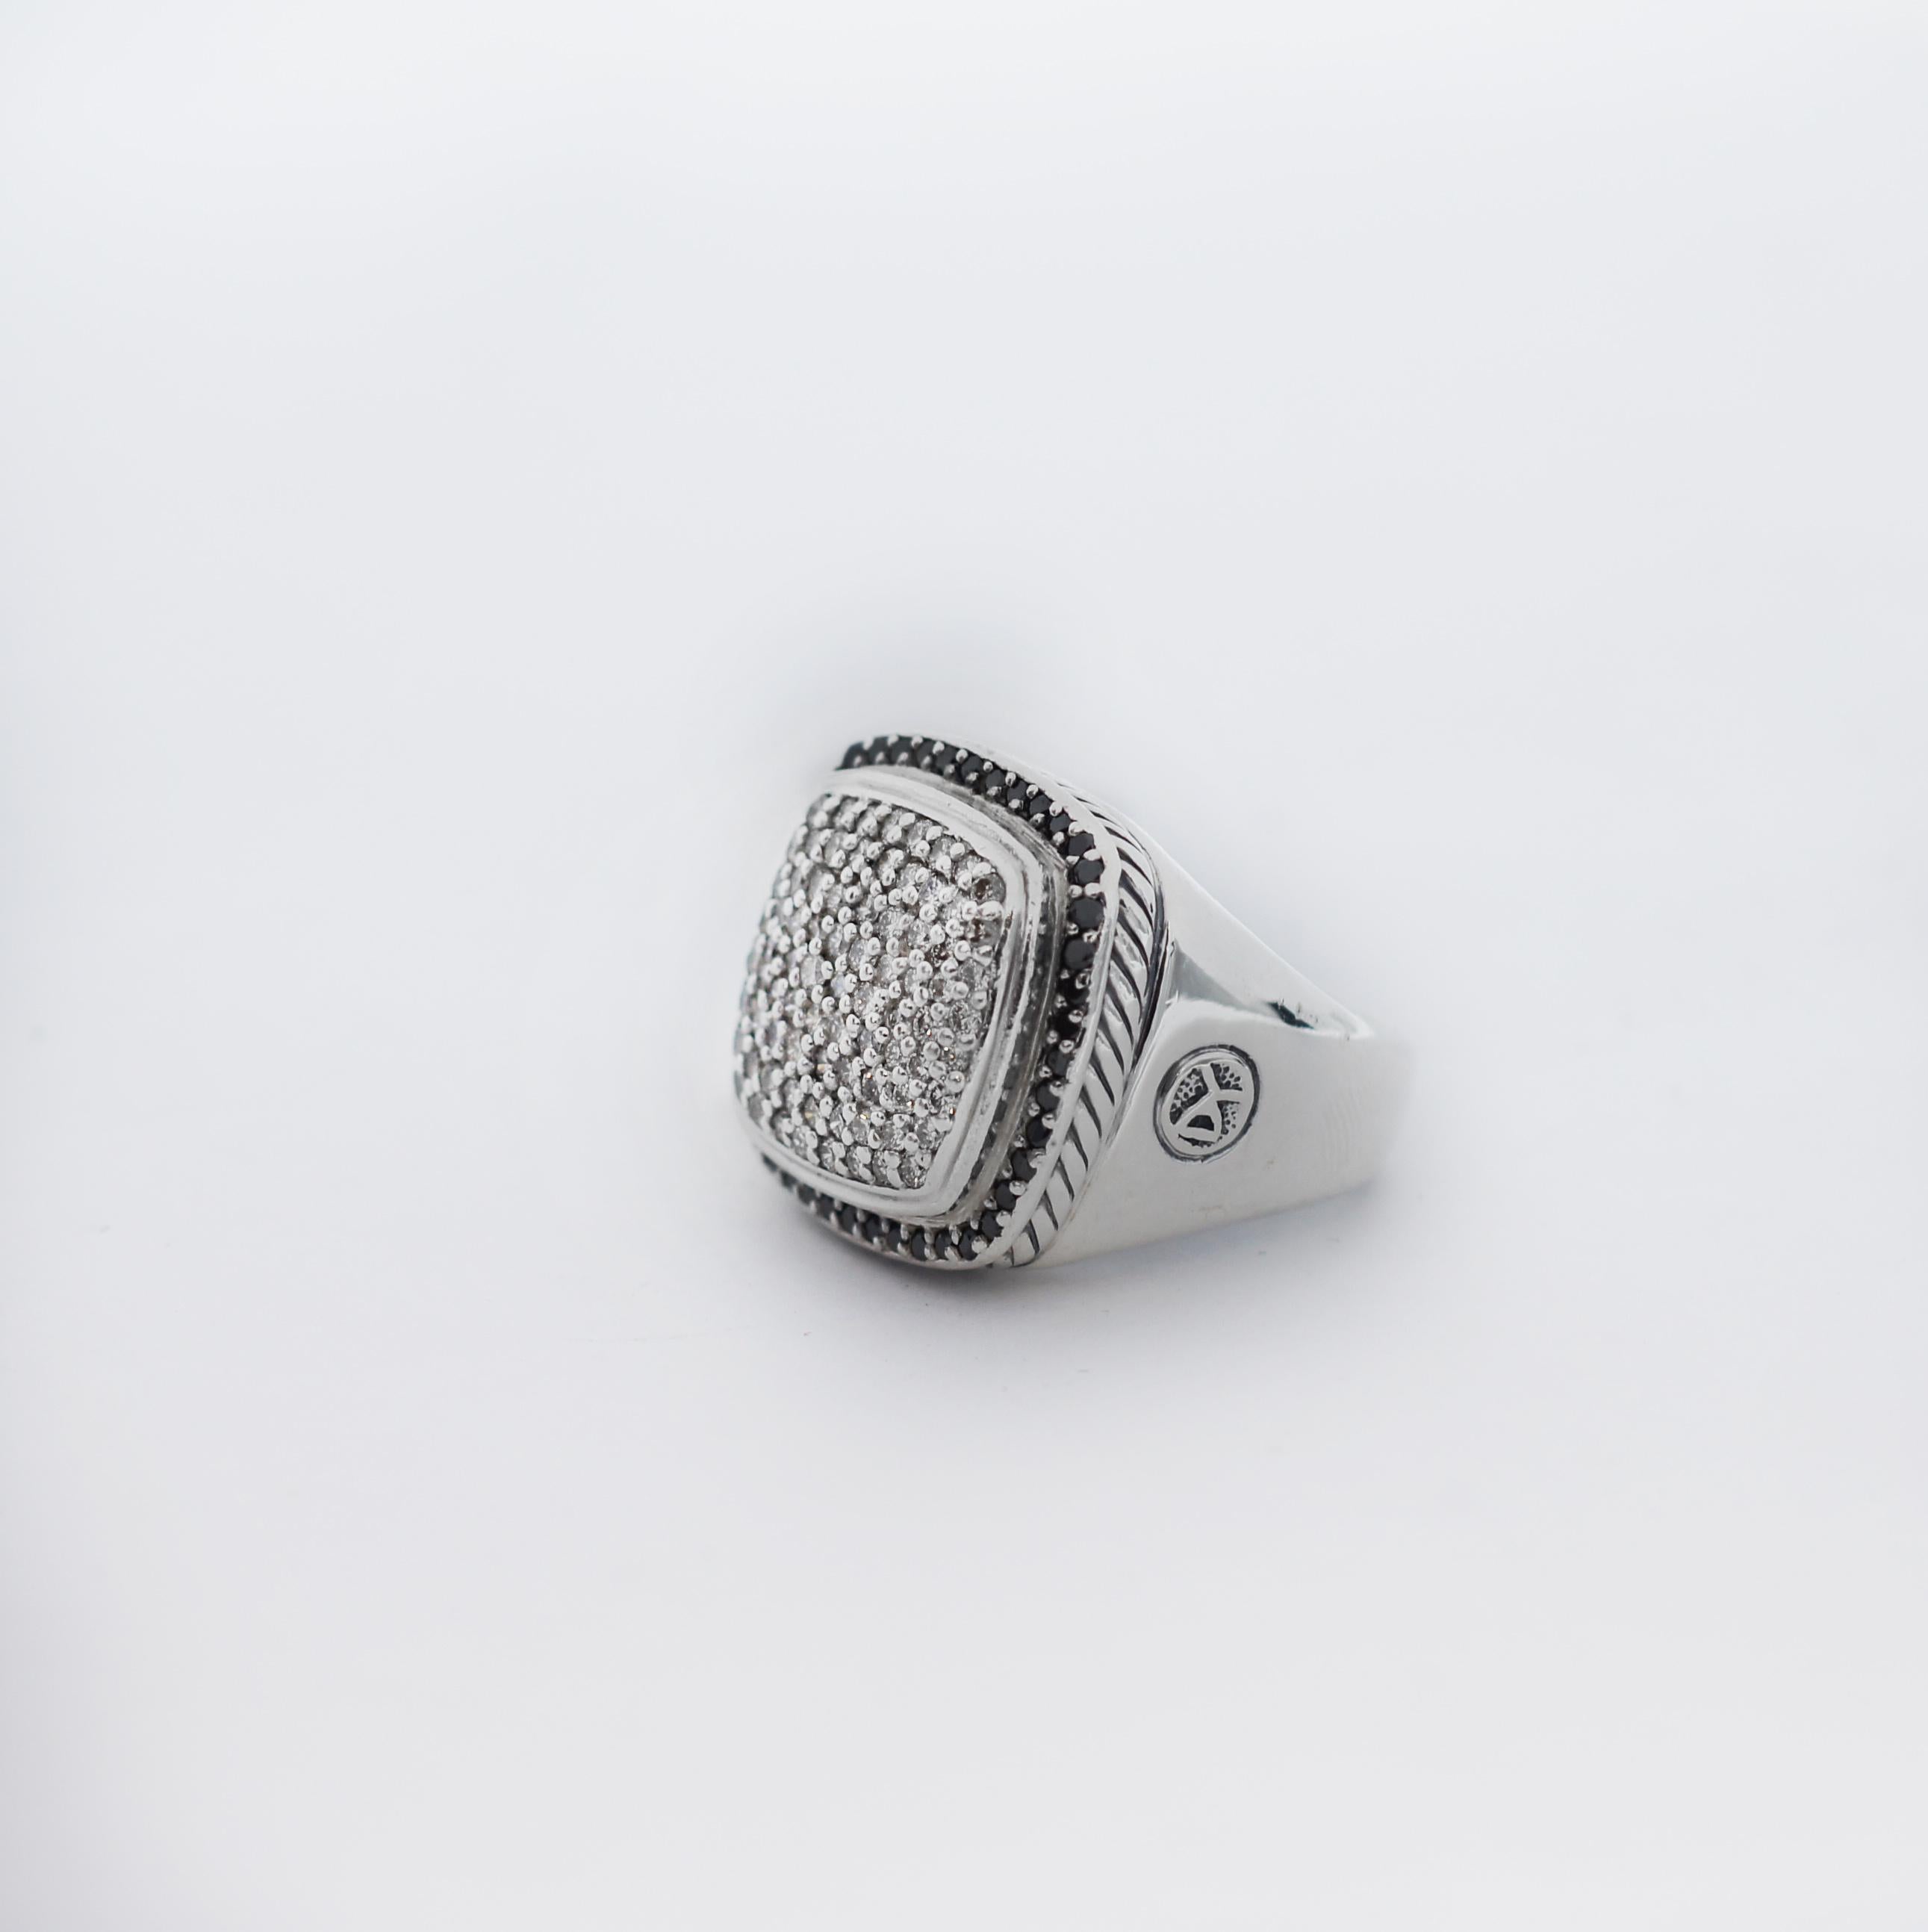 This authentic ring is by David Yurman from the Albion Collection, it is crafted from 925 sterling silver.  The ring features a cushion shape top set with sparkling pave diamonds with black diamond halo.  Cable design around the bridge with smooth